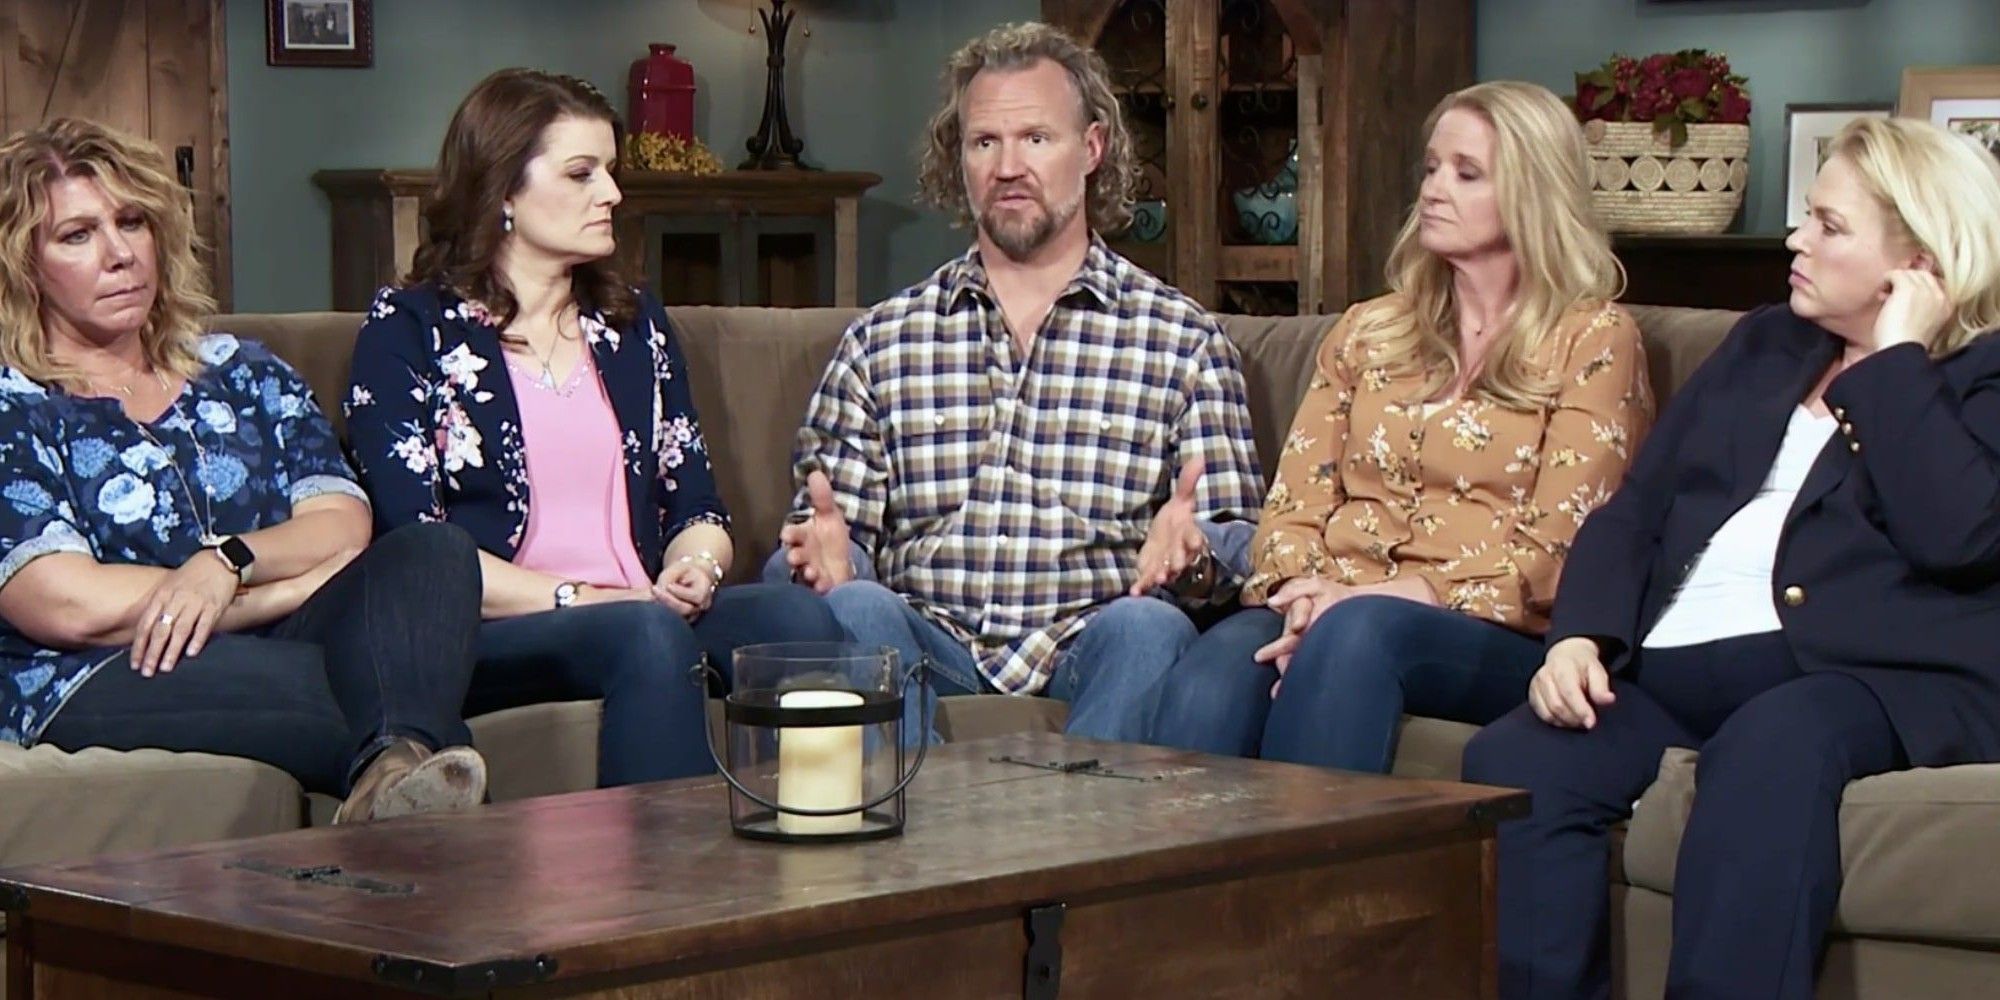 Sister Wives: What We Know About The 'My Sisterwife's Closet' Company